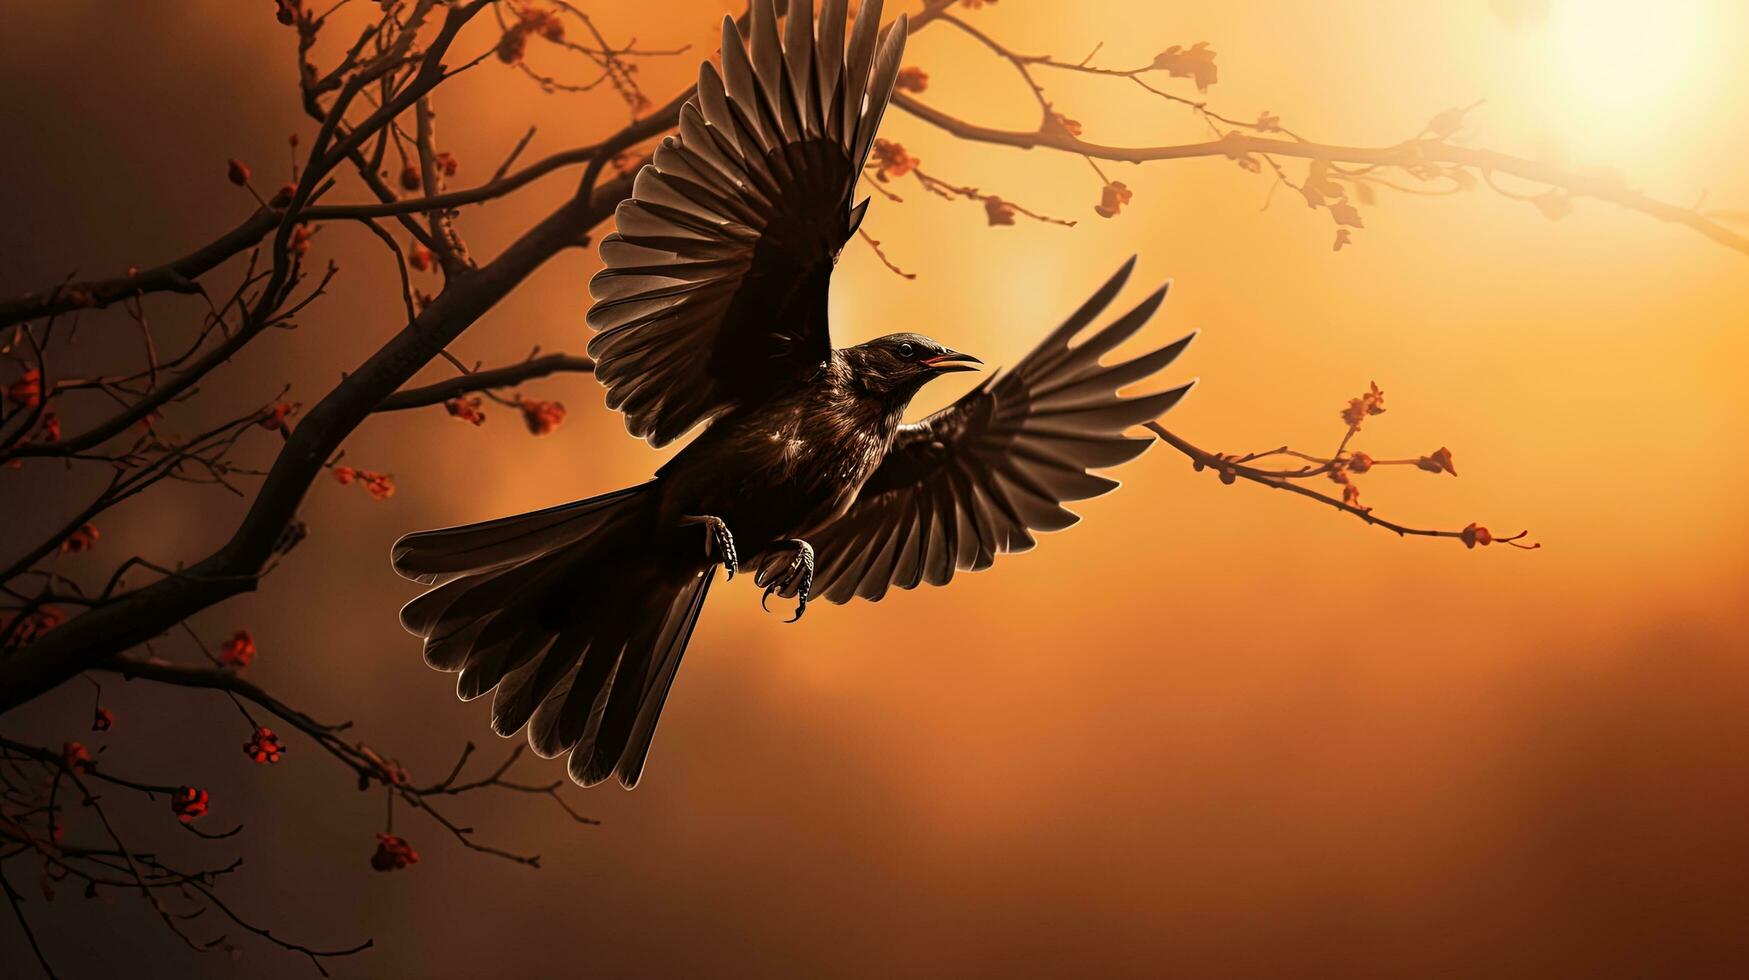 A flying bird amidst tiny branches. silhouette concept photo